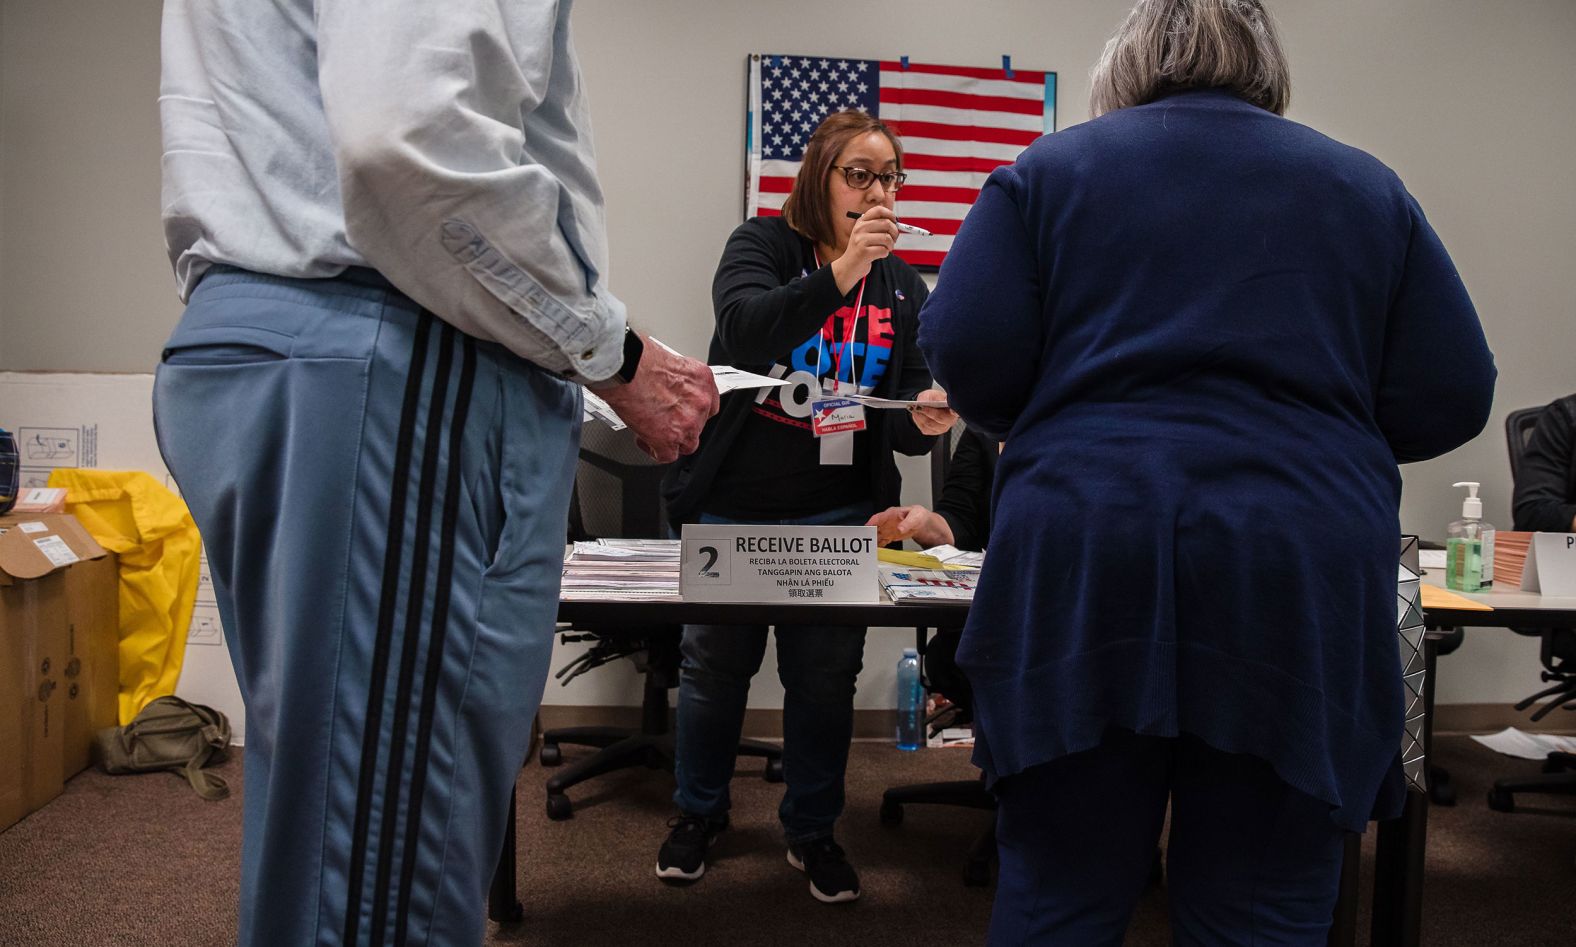 Volunteer Maria Hernandez assists voters at a polling place in San Diego.